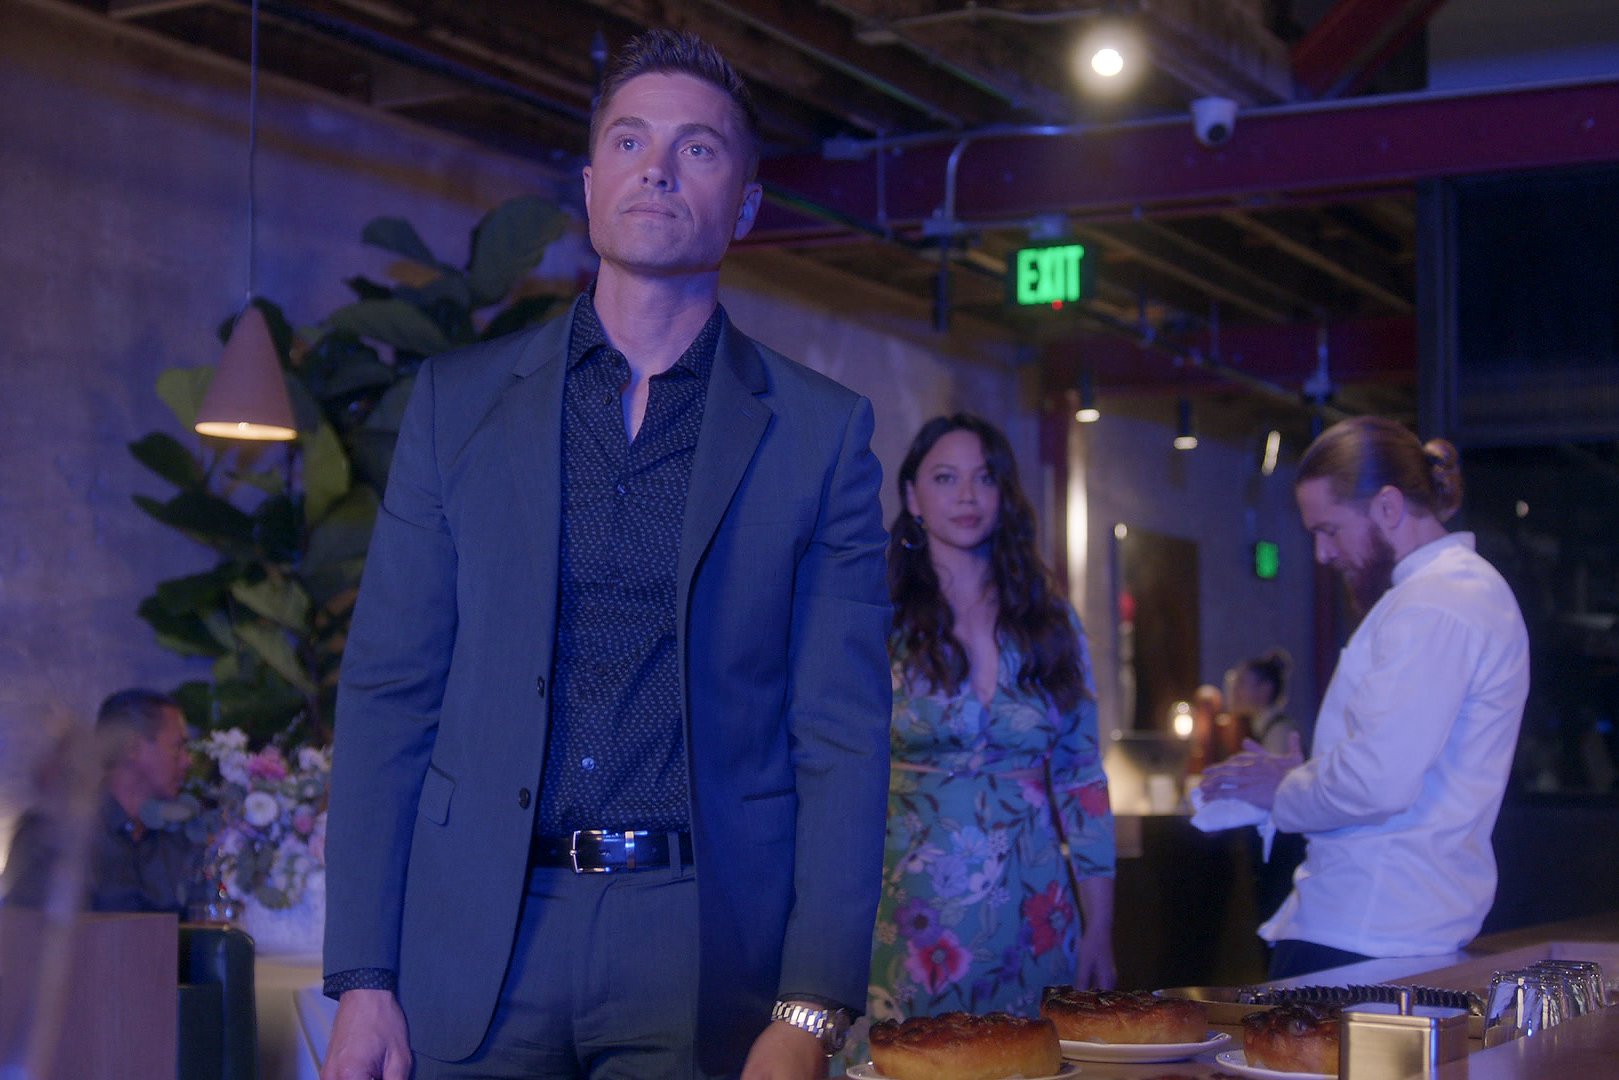 Eric Winter and Melissa O'Neil, in character as Tim Bradford and Lucy Chen in 'The Rookie' Season 5, share a scene at a restaurant. Tim wears a dark gray suit over a black button-up shirt. Lucy wears a light blue dress with pink, purple, and white flowers on it.